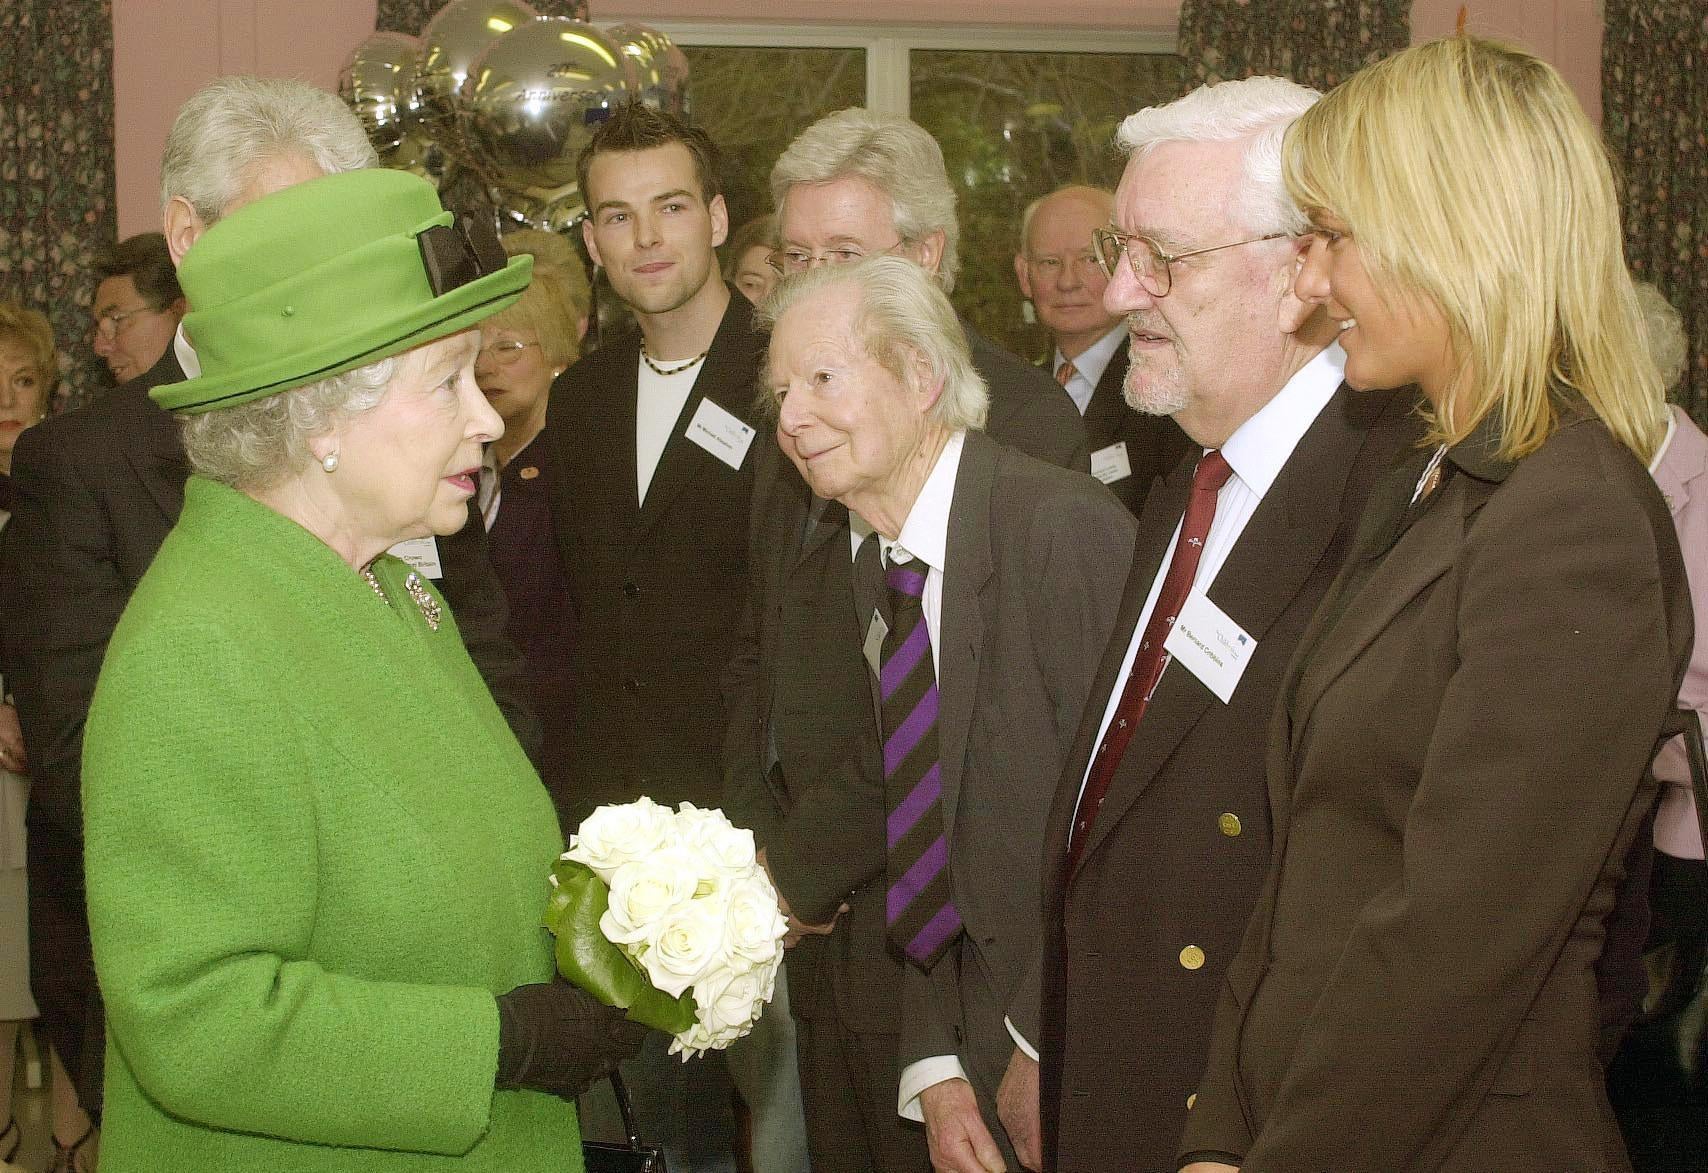 Meeting the Queen at Children’s Trust in Tadworth, Surrey in 2004 (John Stilwell/PA)